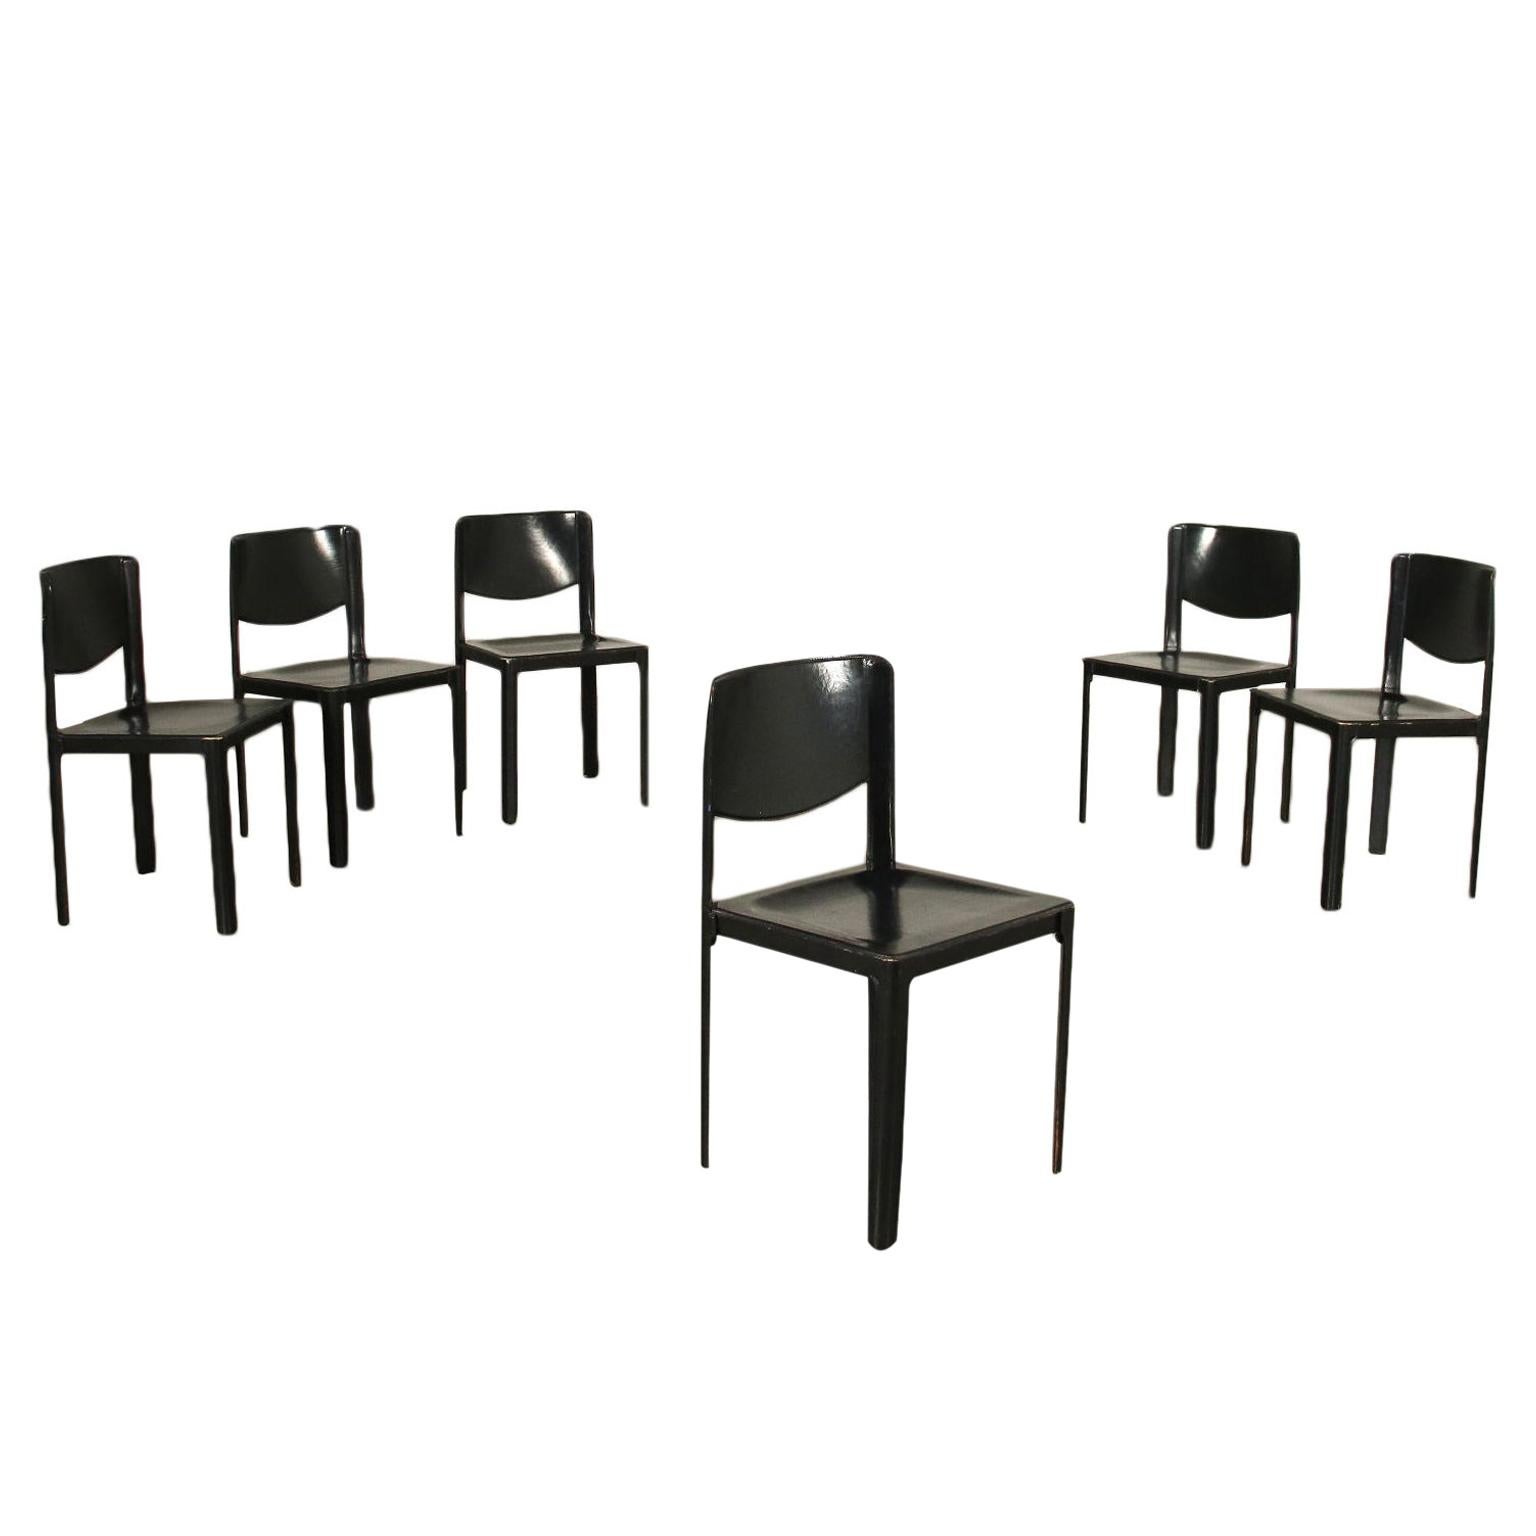 Group of Six Tito Agnoli Chairs Metal Leather, 1980s